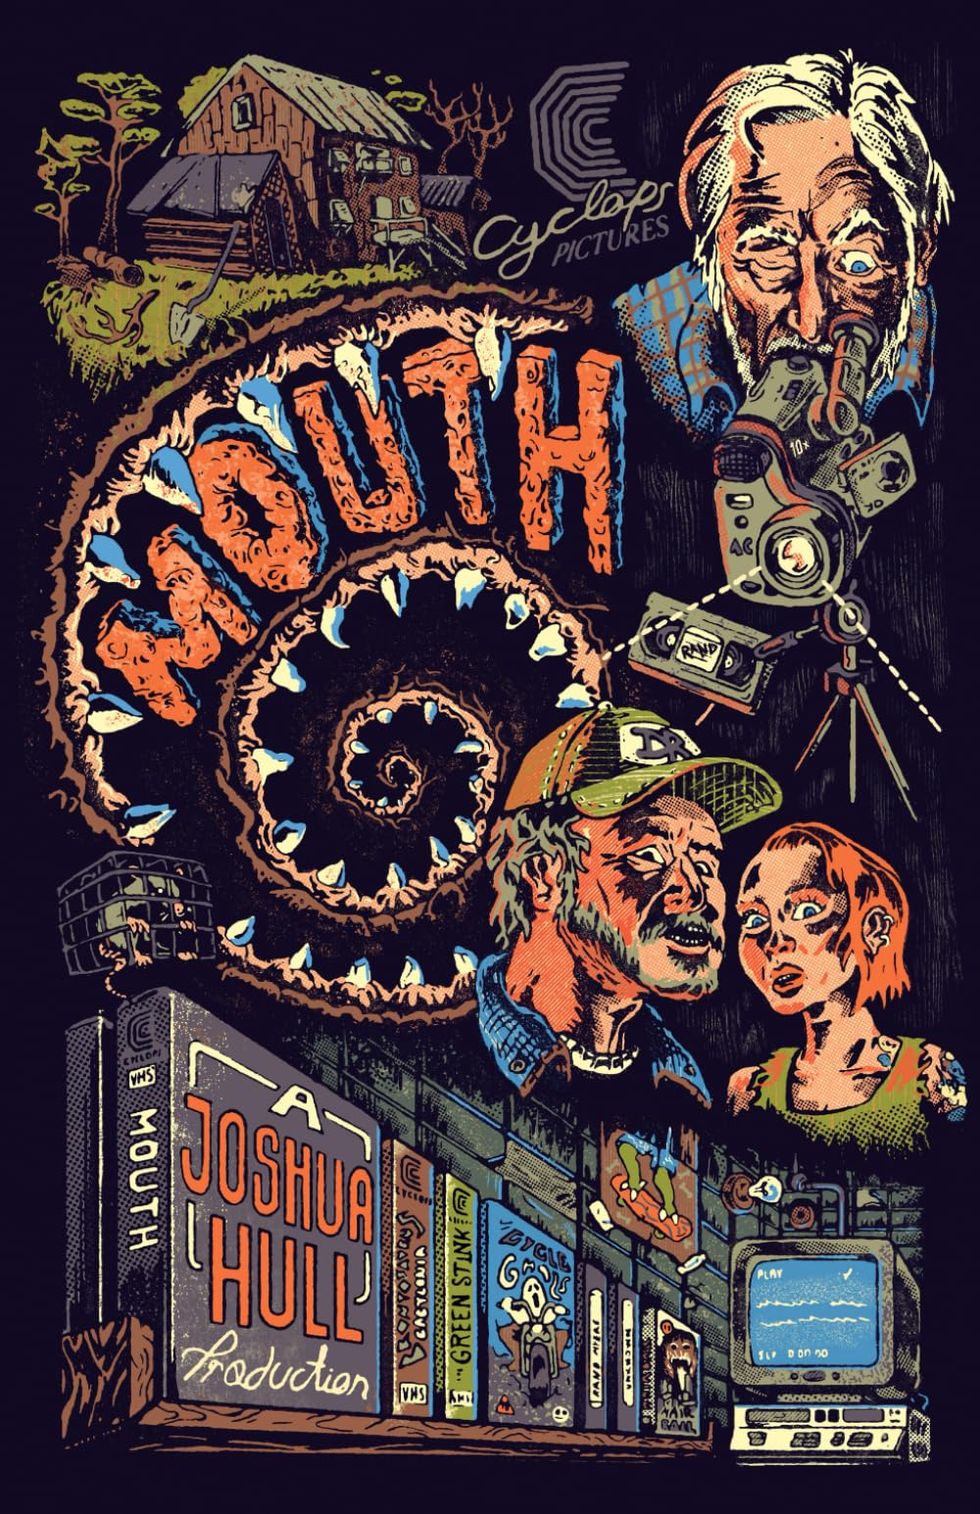 Mouth, by Joshua Hull